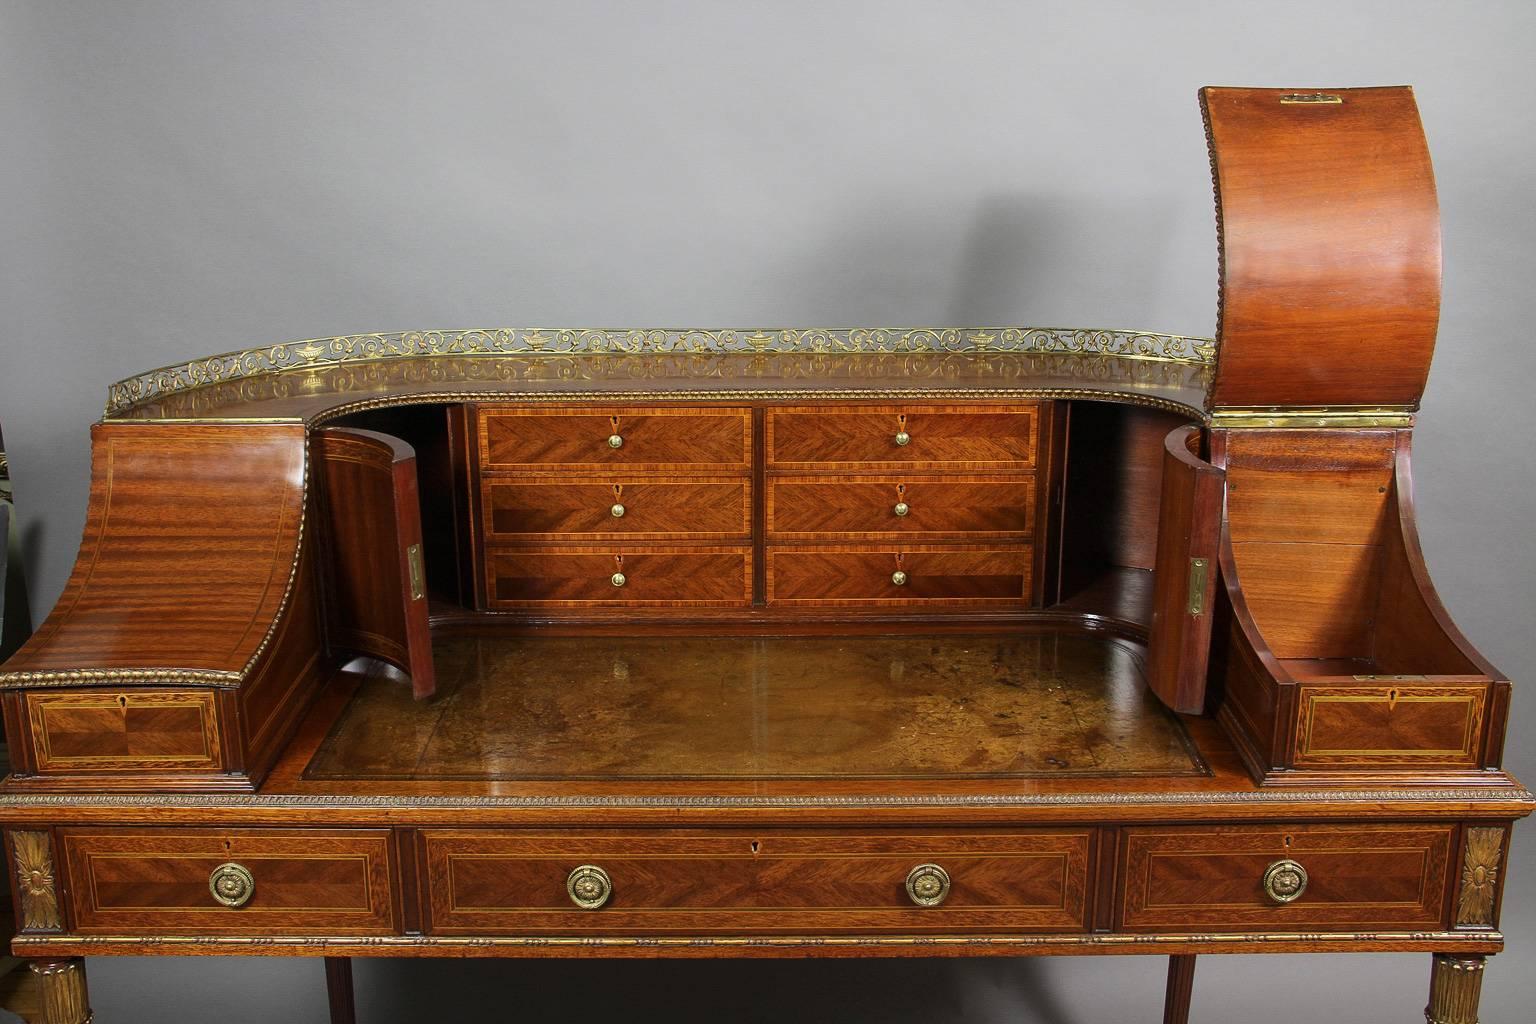 With gilt bronze rail with wraparound drawer and compartment section over a leather writing surface over three drawers raised on circular tapered legs with toupie feet. Signed Gillows on lock plates. Gillows of Lancaster was a Fine furniture